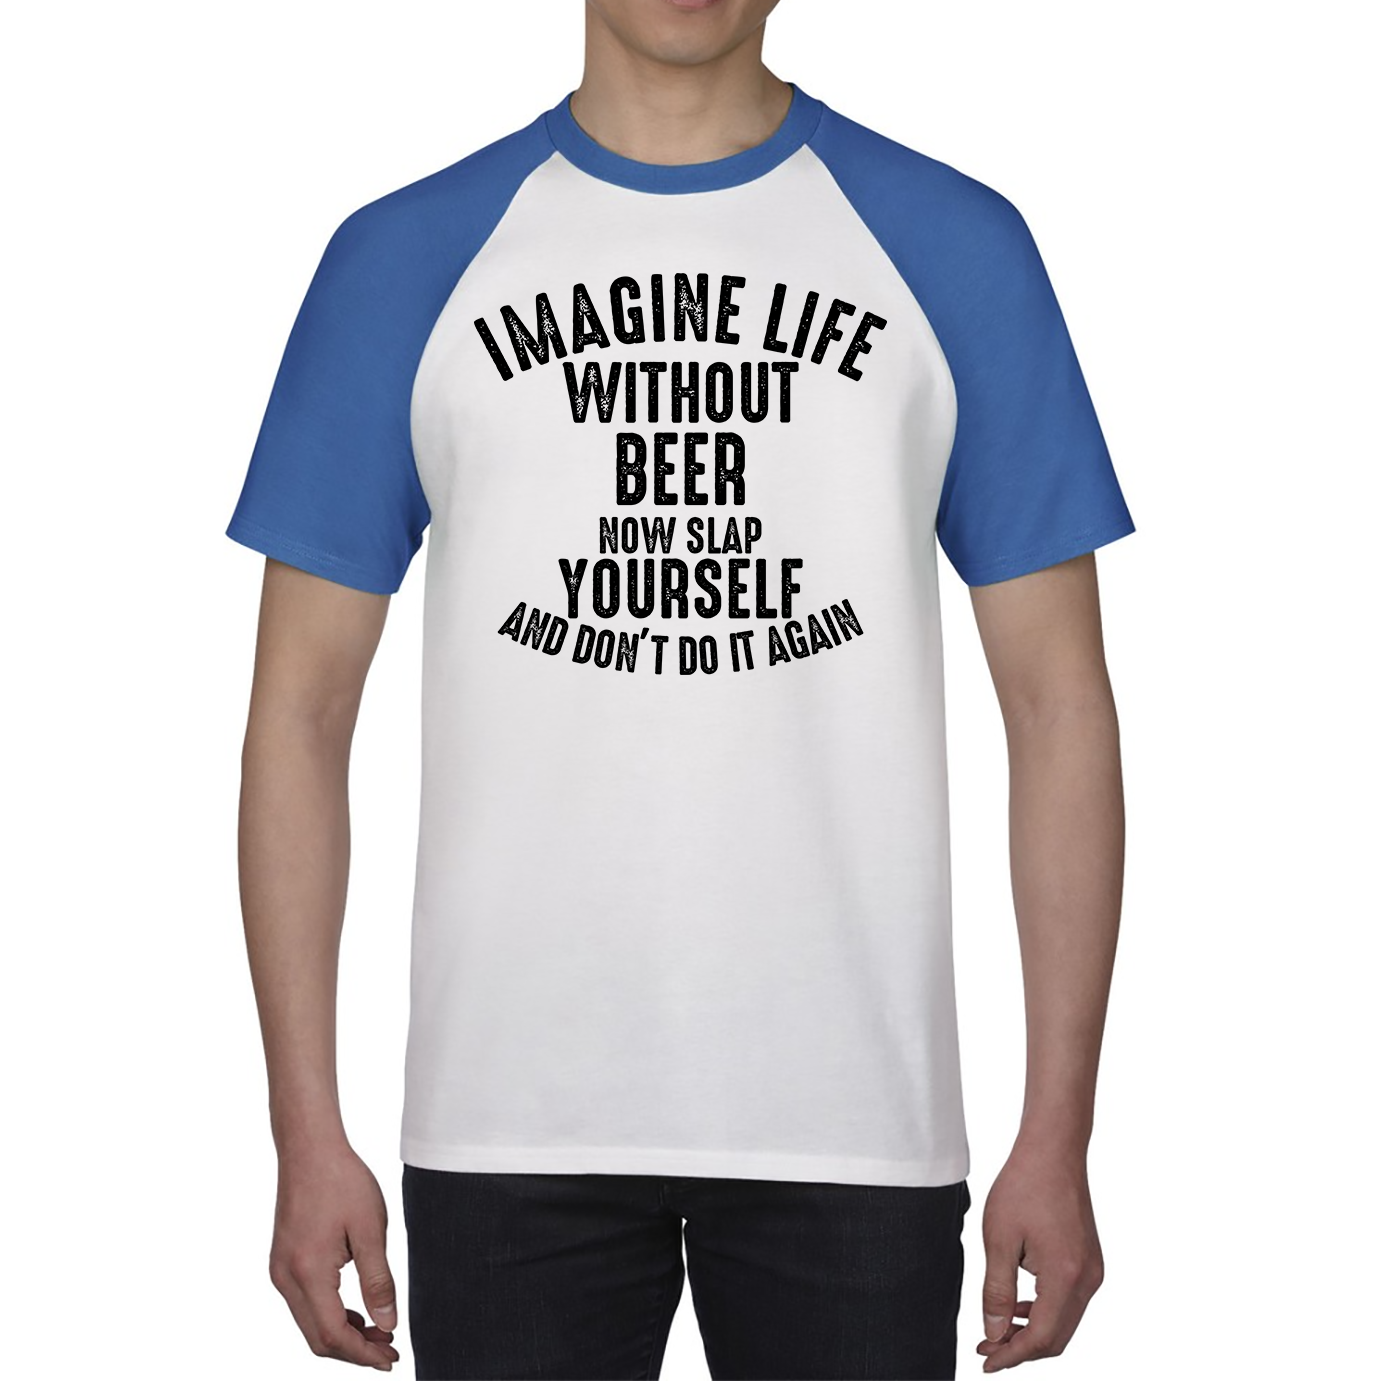 Imagine Life Without Beer Now Slap Yourself And Don' Do It Again Shirt Drink Lovers Beer Drinking Baseball T Shirt